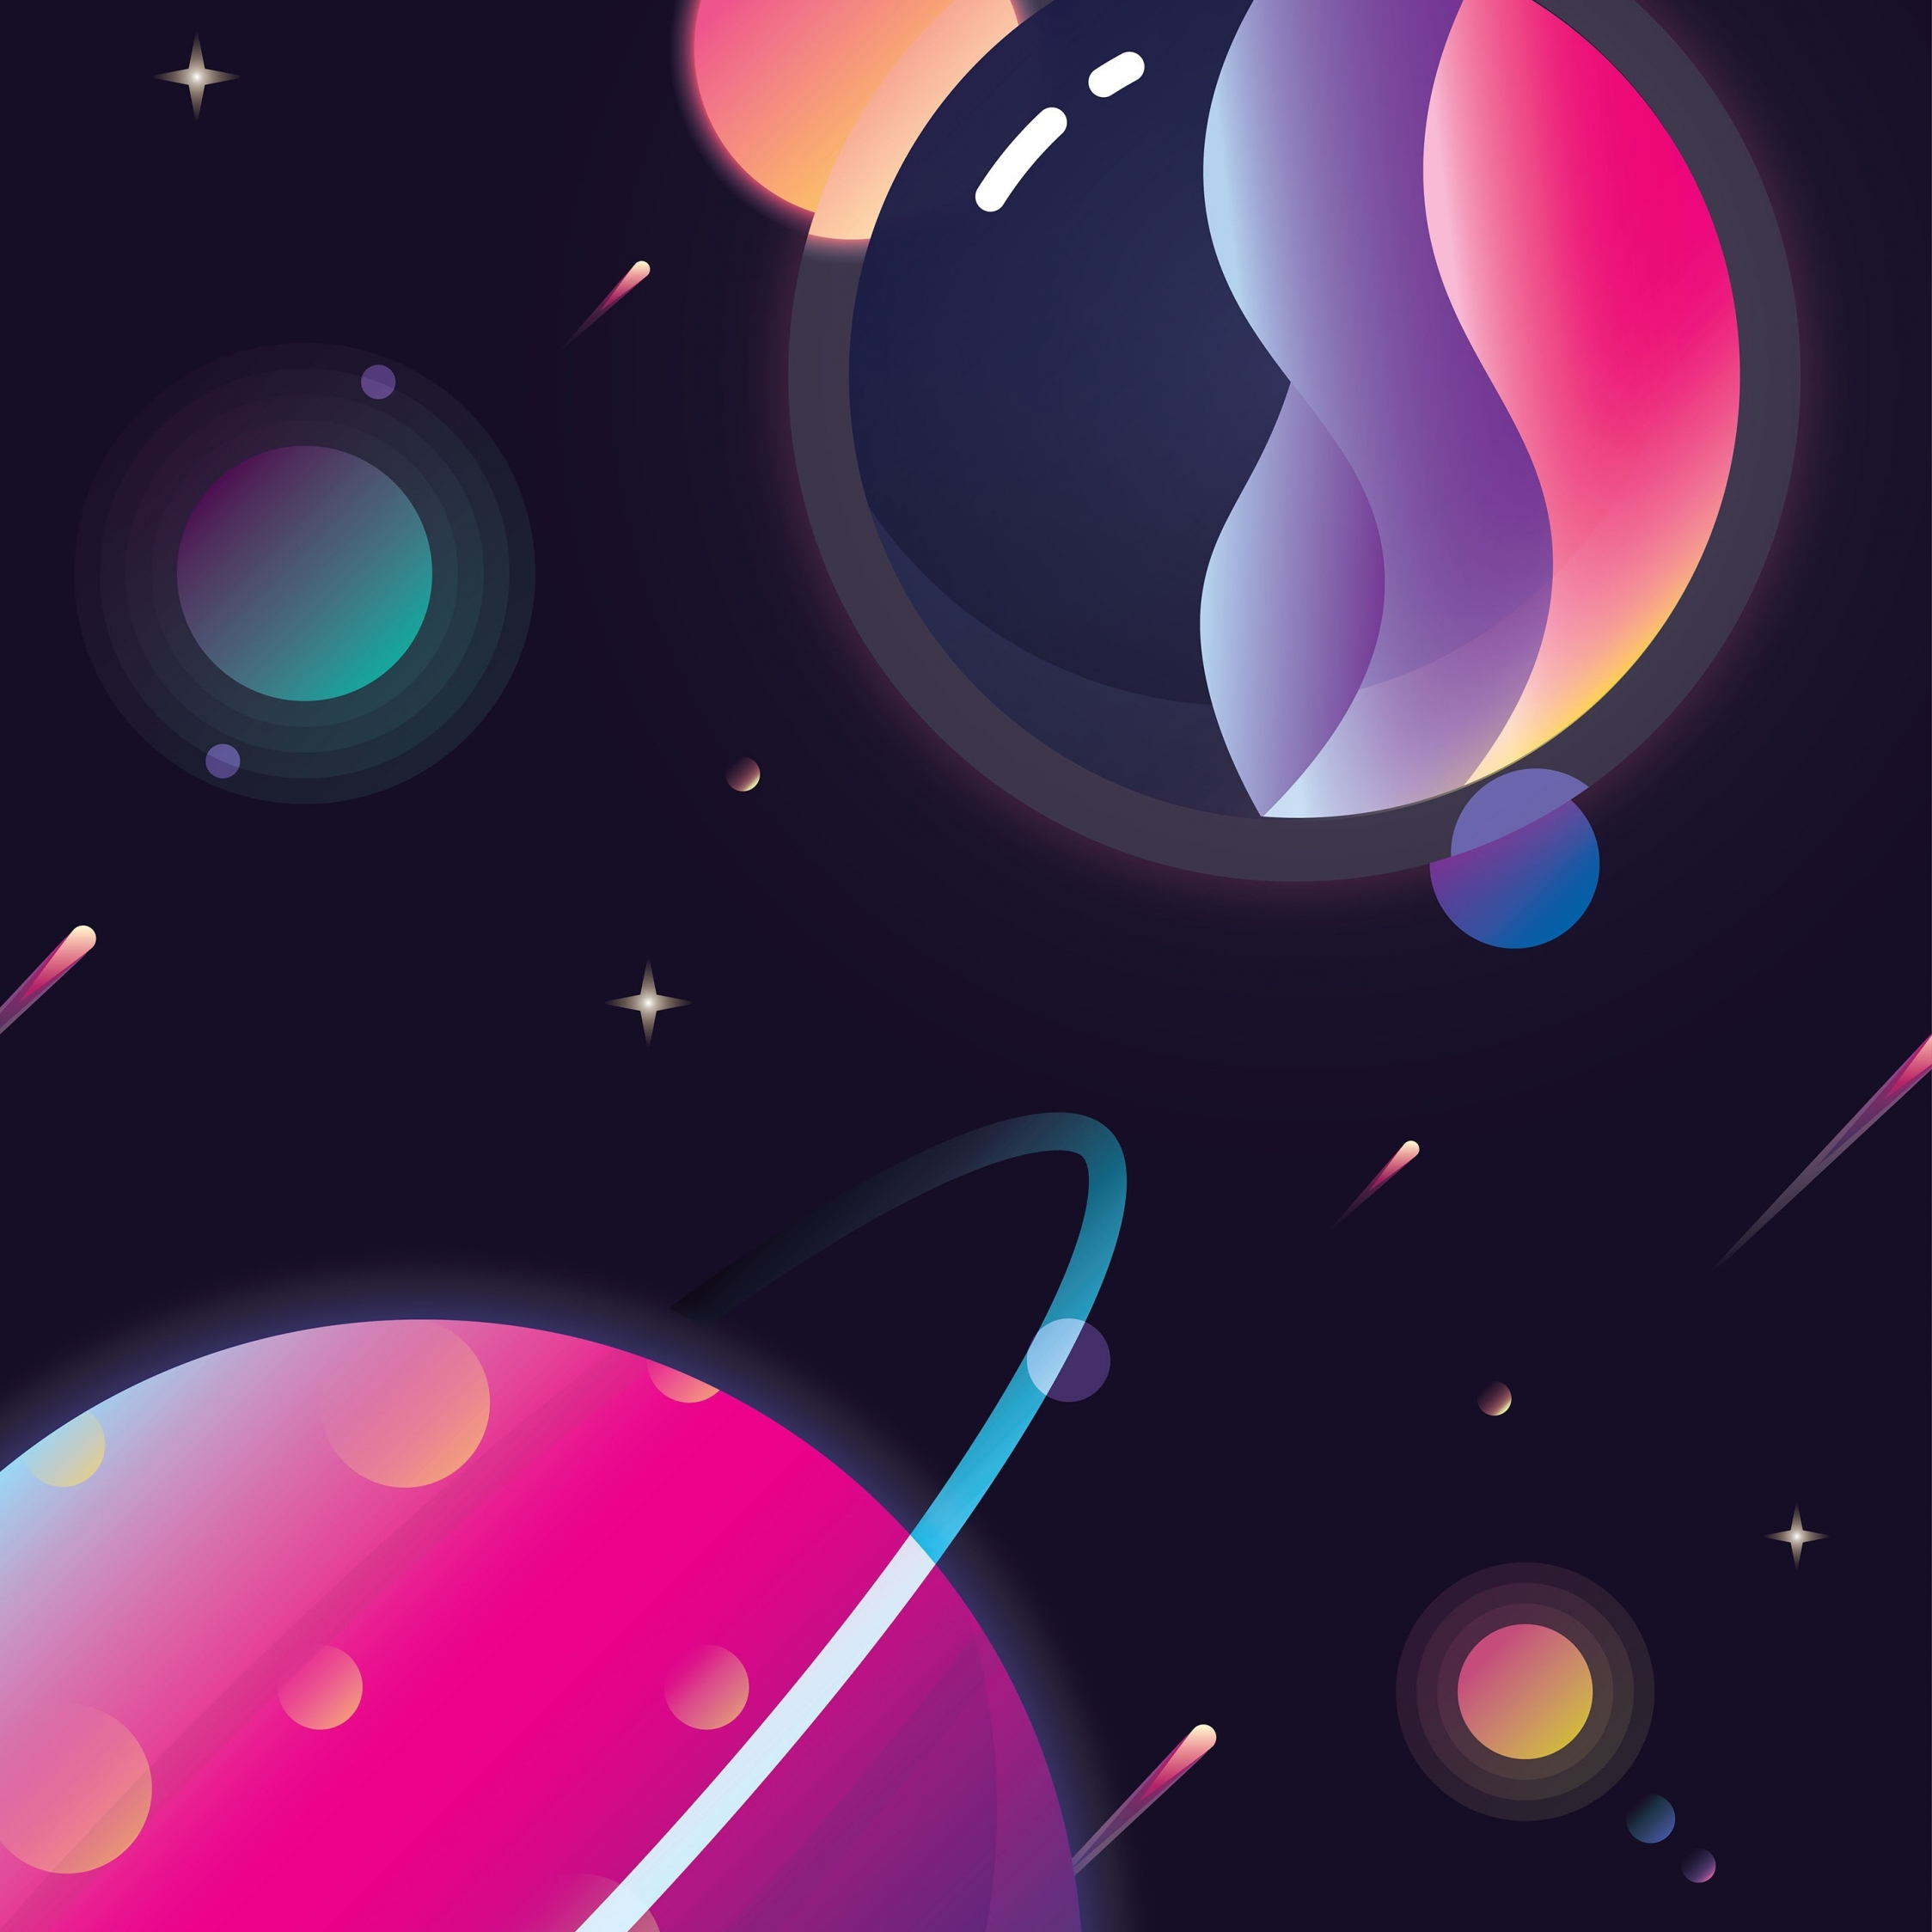 Download wallpaper 2248x2248 space, planets, art, illustration, ipad air, ipad  air 2, ipad 3, ipad 4, ipad mini 2, ipad mini 3, 2248x2248 hd background,  17658